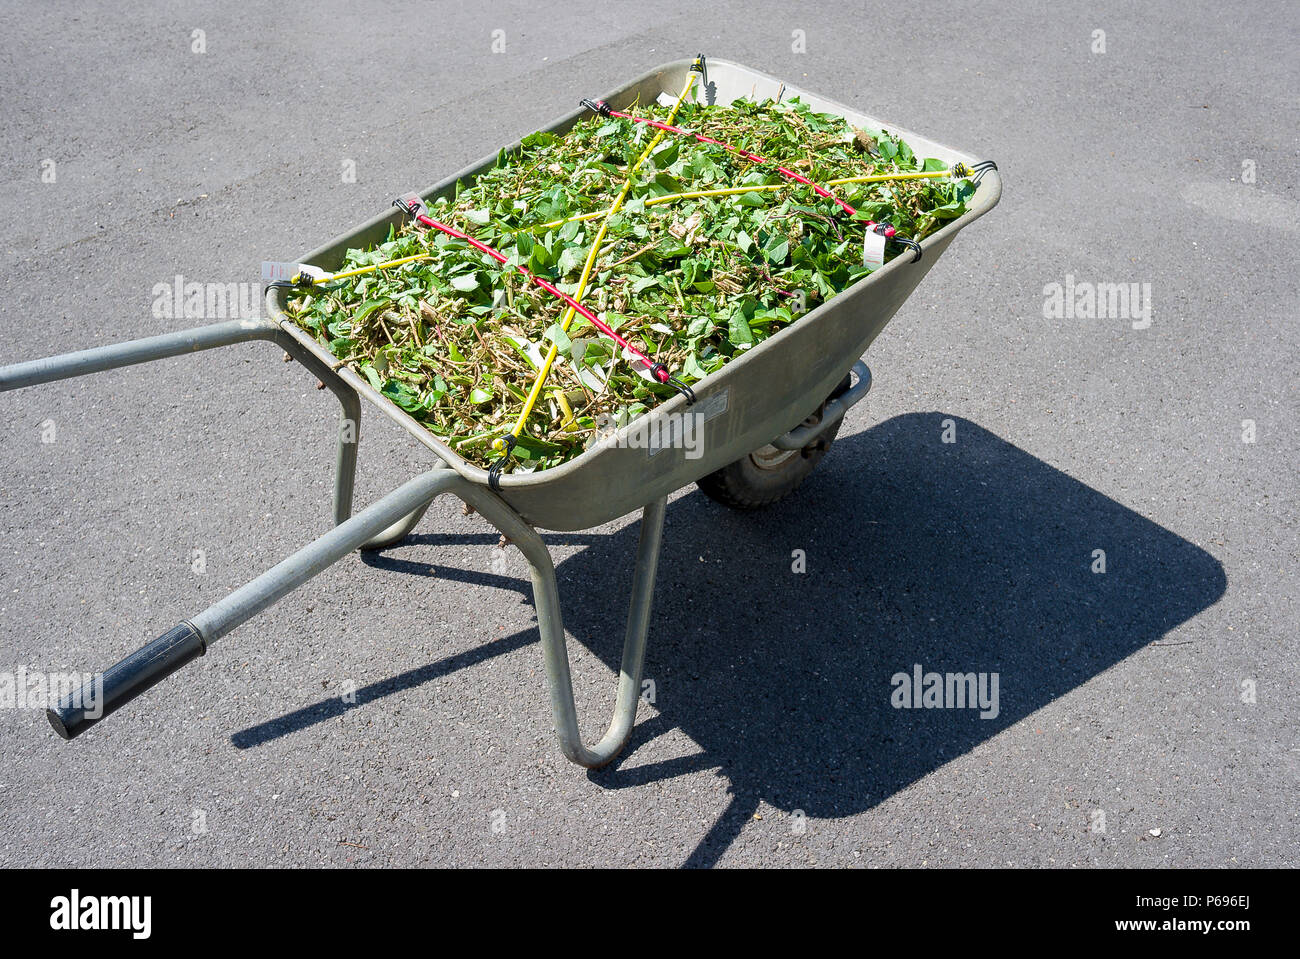 A loaded wheelbarrow with a secure load of fresh shrubby shreddings prior to composting in UK Stock Photo